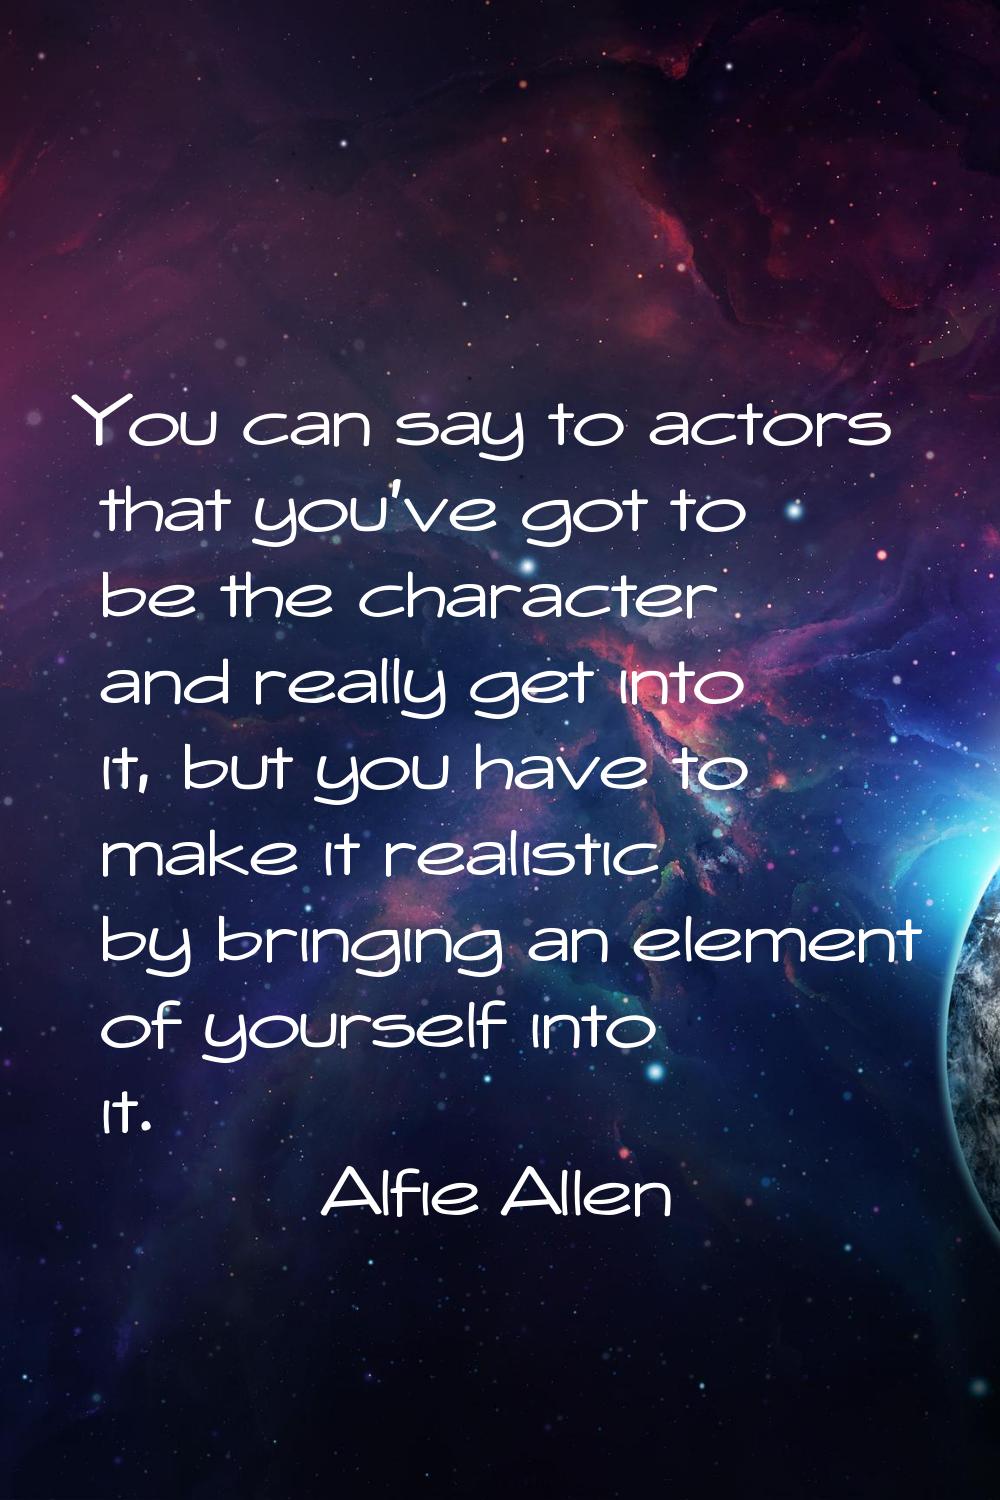 You can say to actors that you've got to be the character and really get into it, but you have to m